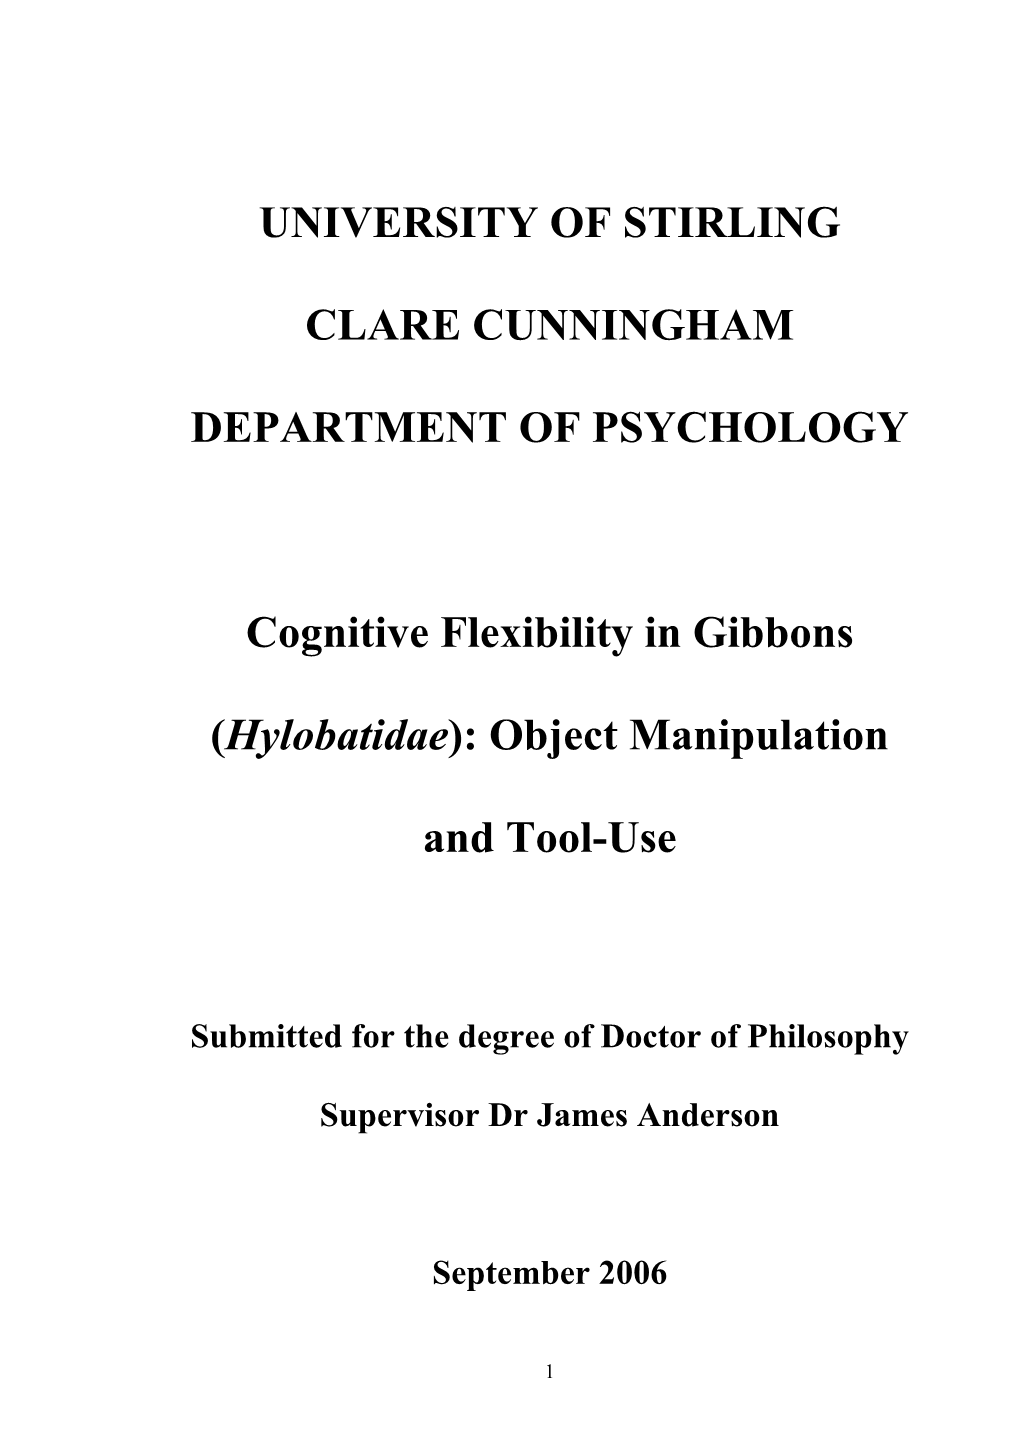 University of Stirling Clare Cunningham Department Of